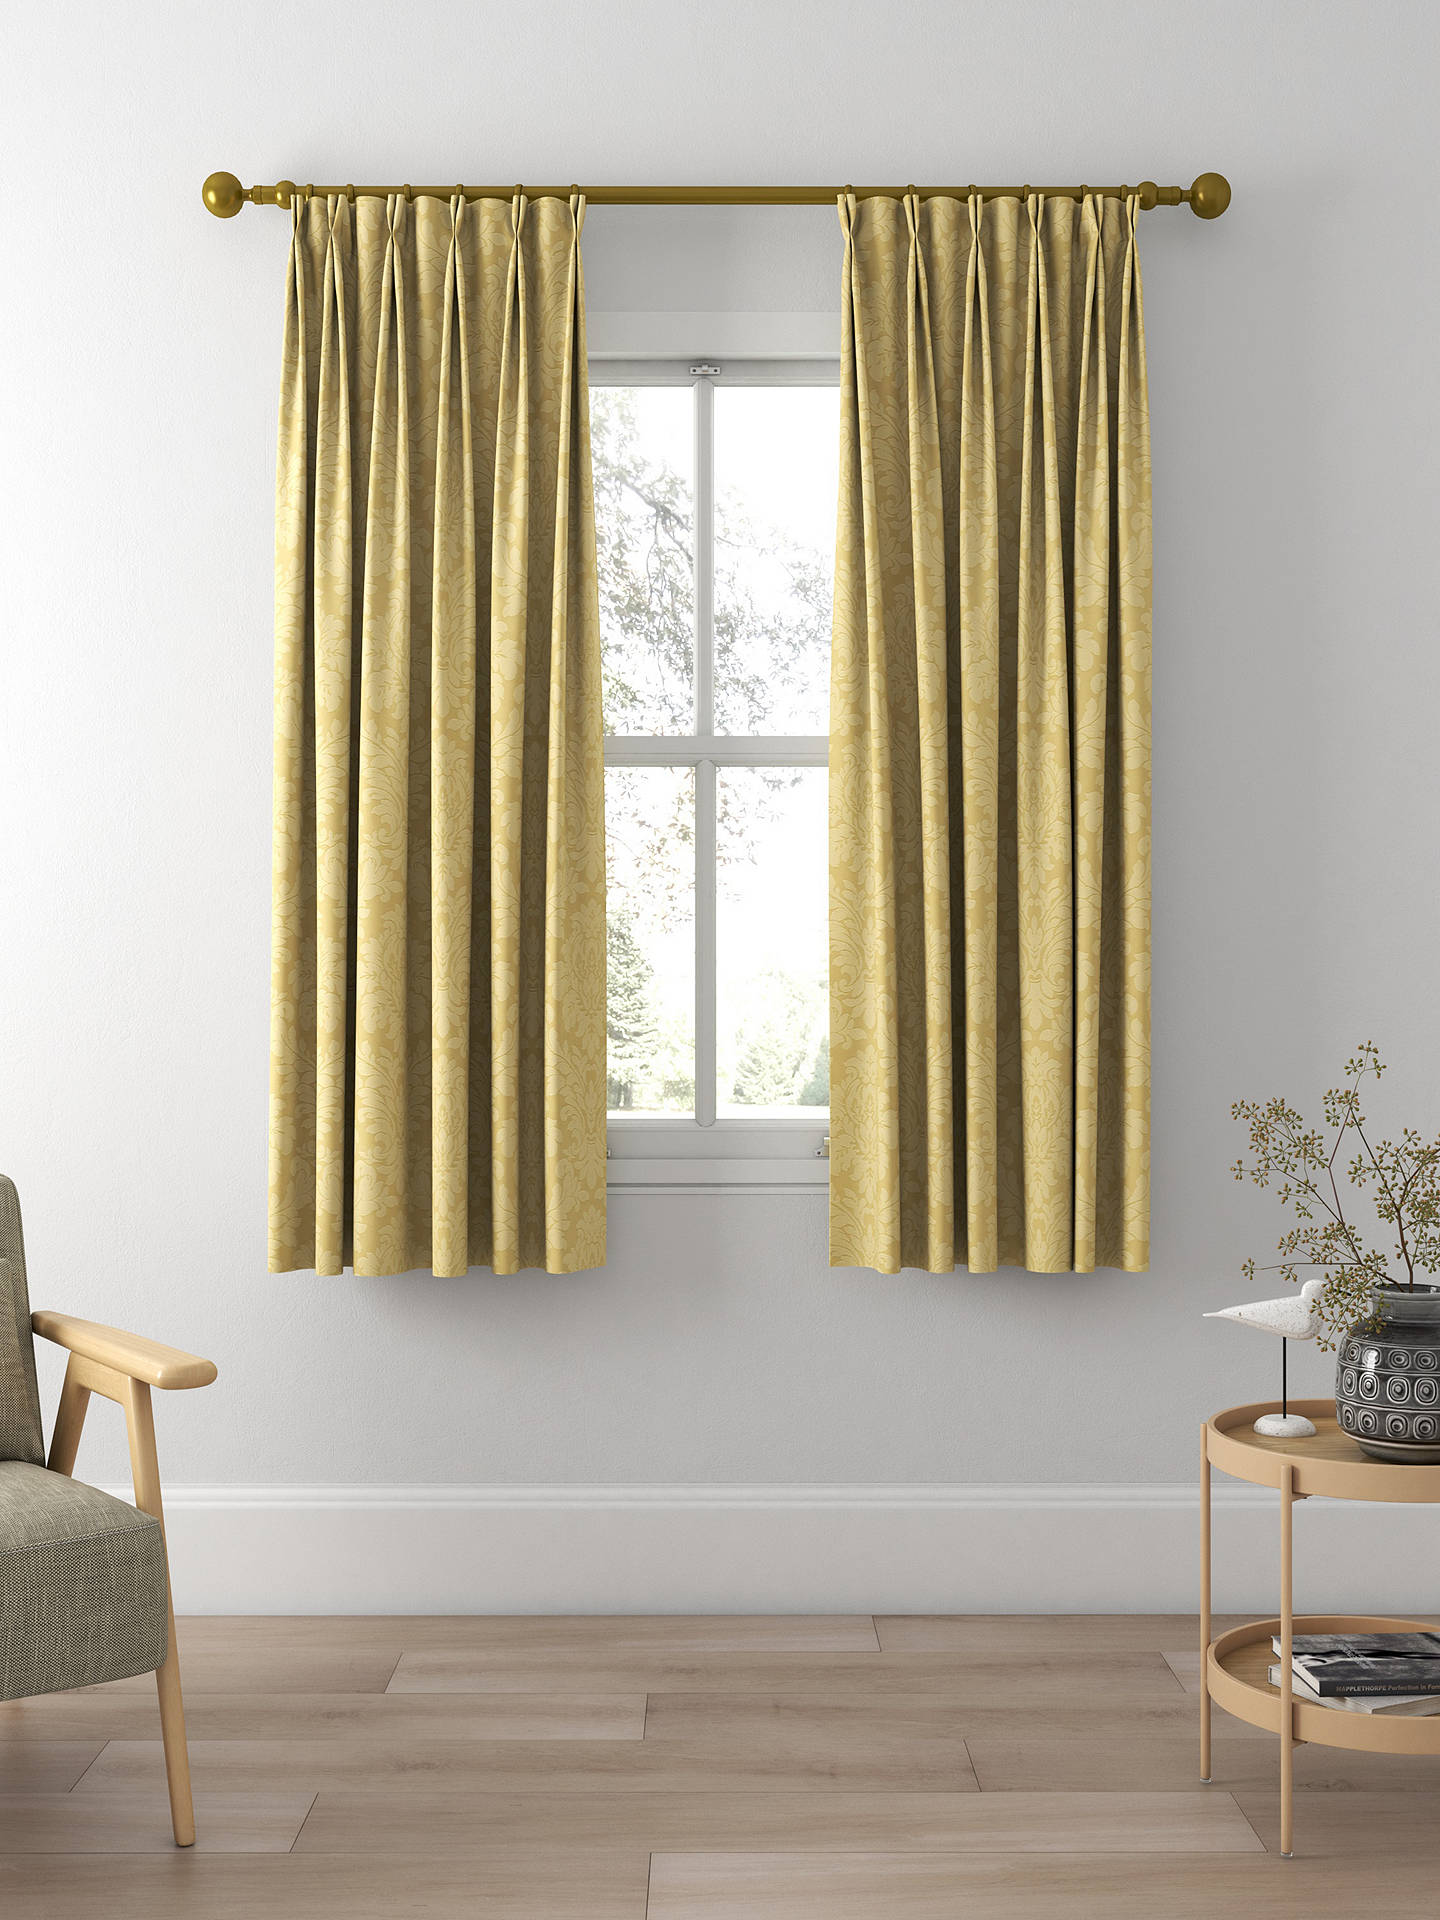 Sanderson Lymington Damask Made to Measure Curtains, Gold